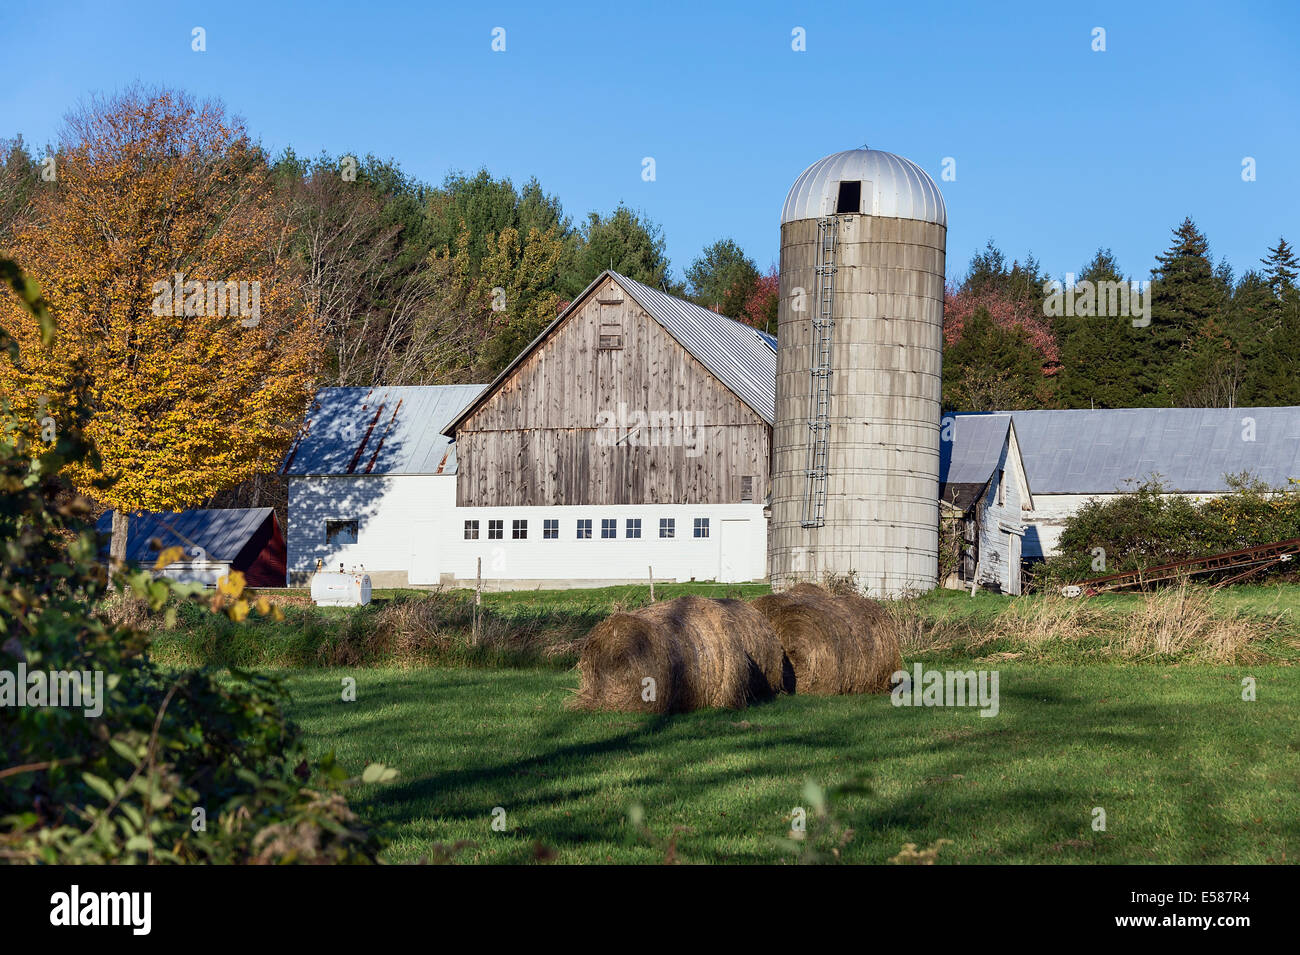 Barn and farm with bales of hay, Woodstock, Vermont. Stock Photo